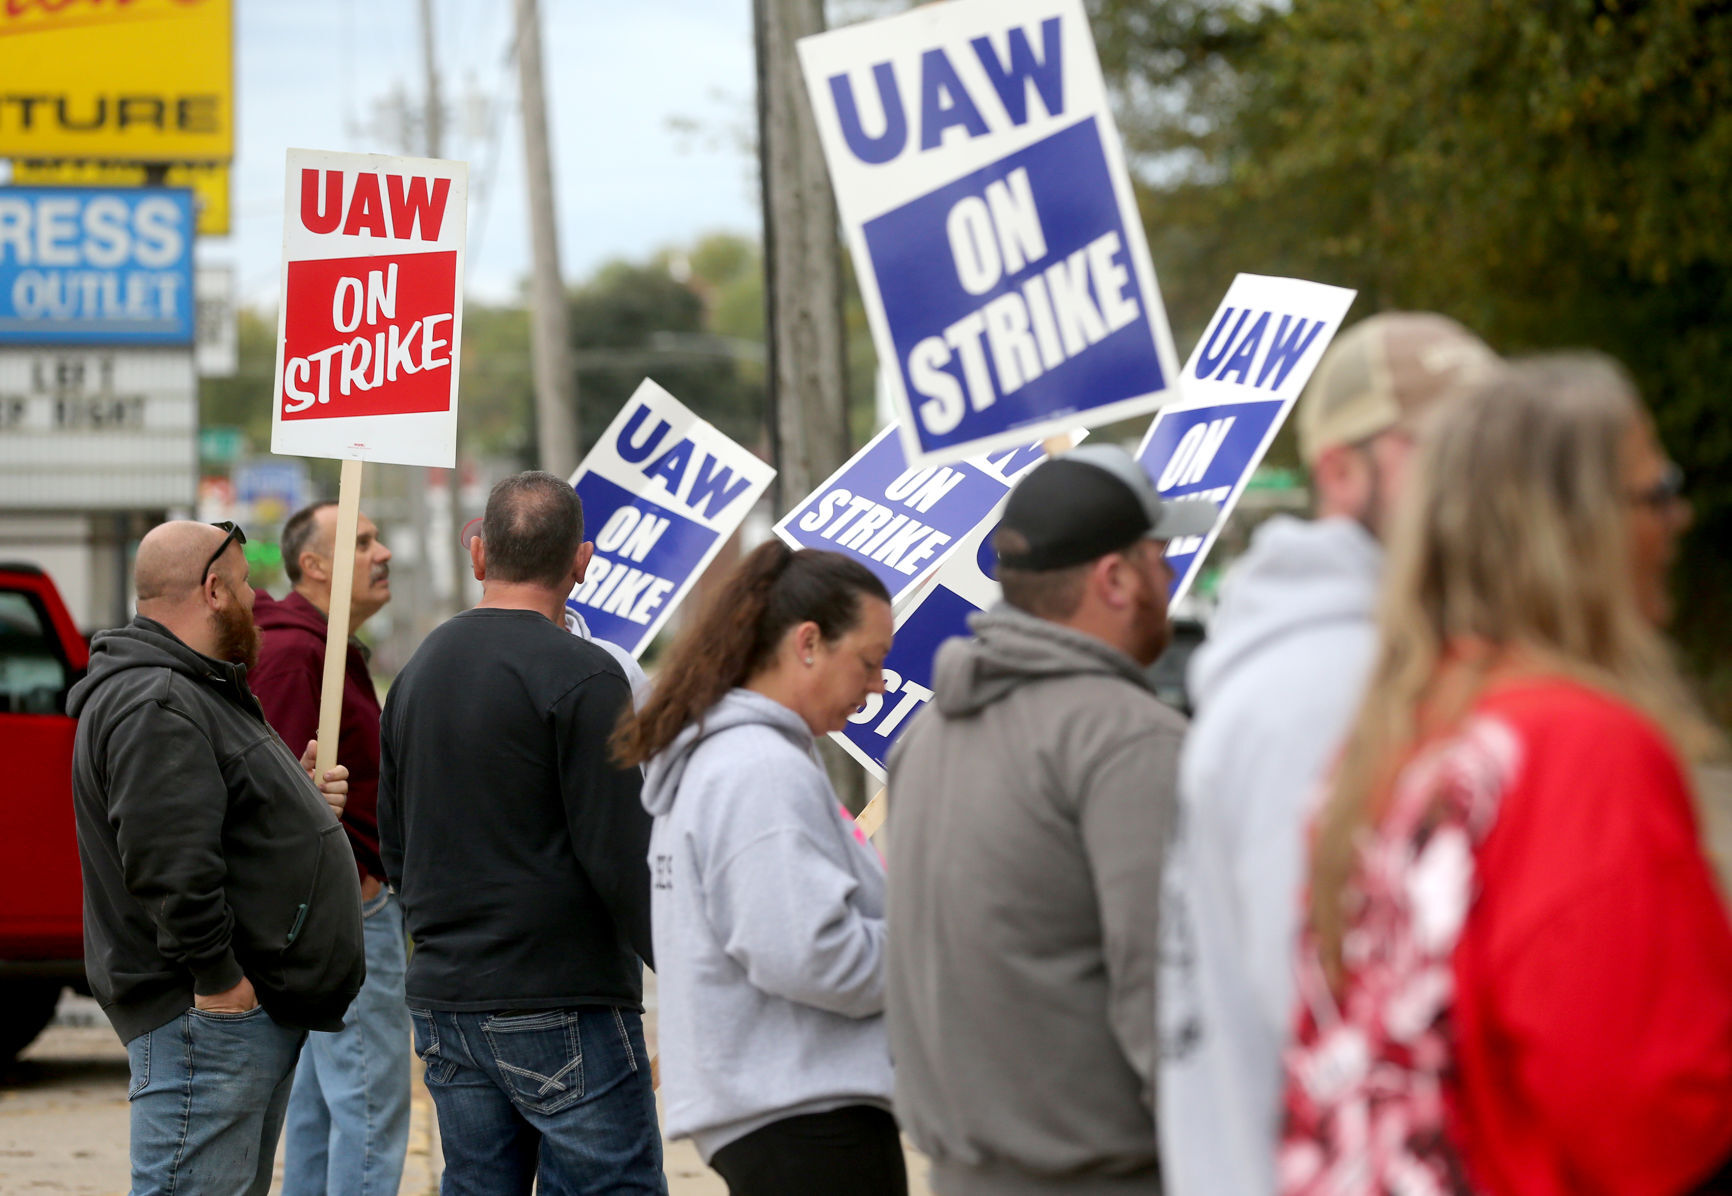 John Deere Dubuque Works union employees picket outside UAW Local 94 in Dubuque on Thursday, Oct. 14, 2021.    PHOTO CREDIT: JESSICA REILLY